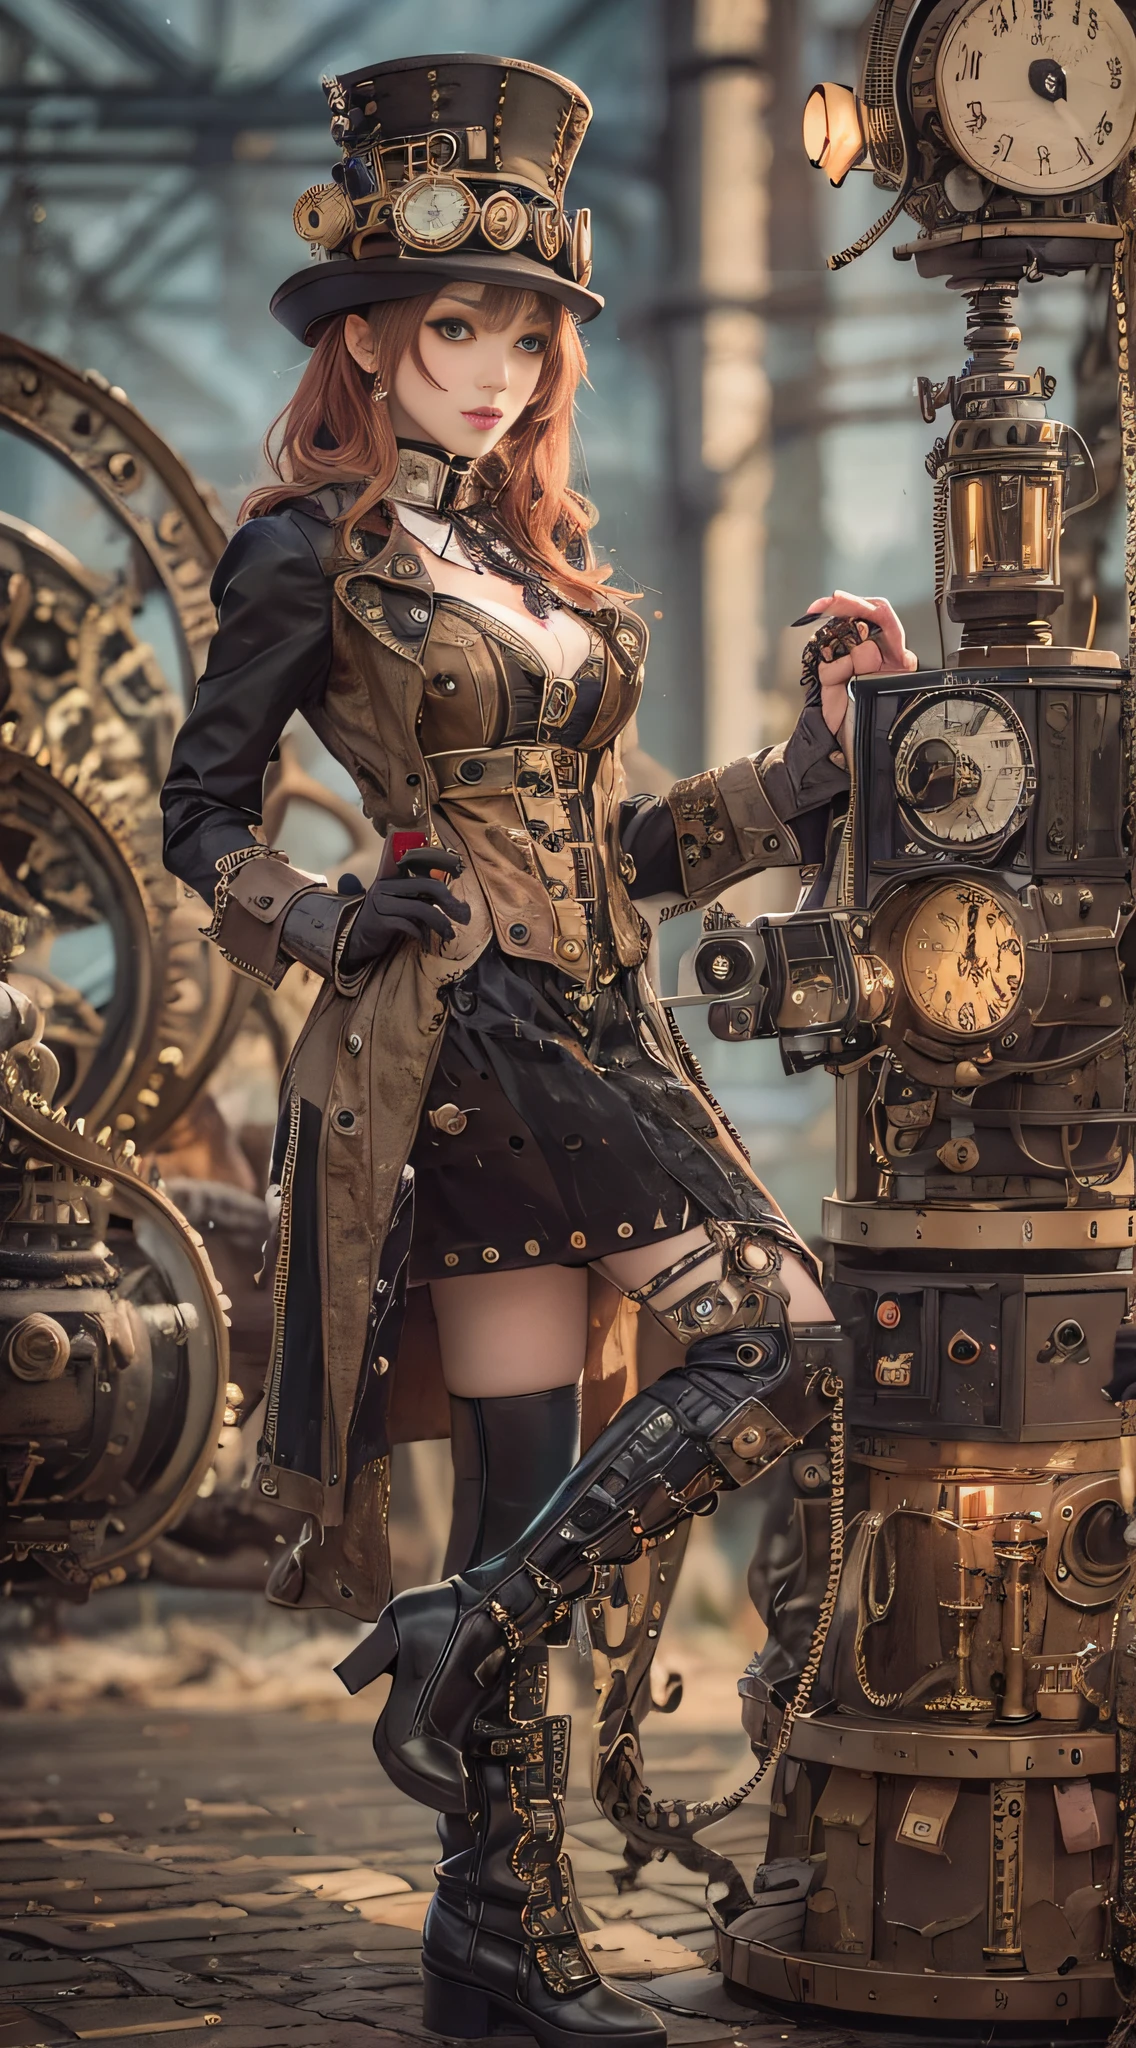 Woman in steampunk costume taking pictures, wearing steampunk attire, steampunk fantasy style, (Steampunk), ( Steampunk ), a steampunk beautiful goddess, steampunk beautiful anime woman, Steampunk Girl, Steampunk style, steampunk fantasy, Steampunk, steampunk inventor girl, golden steampunk, steampunc, steampunc, Set in a steampunk world, Vivid steampunk concept